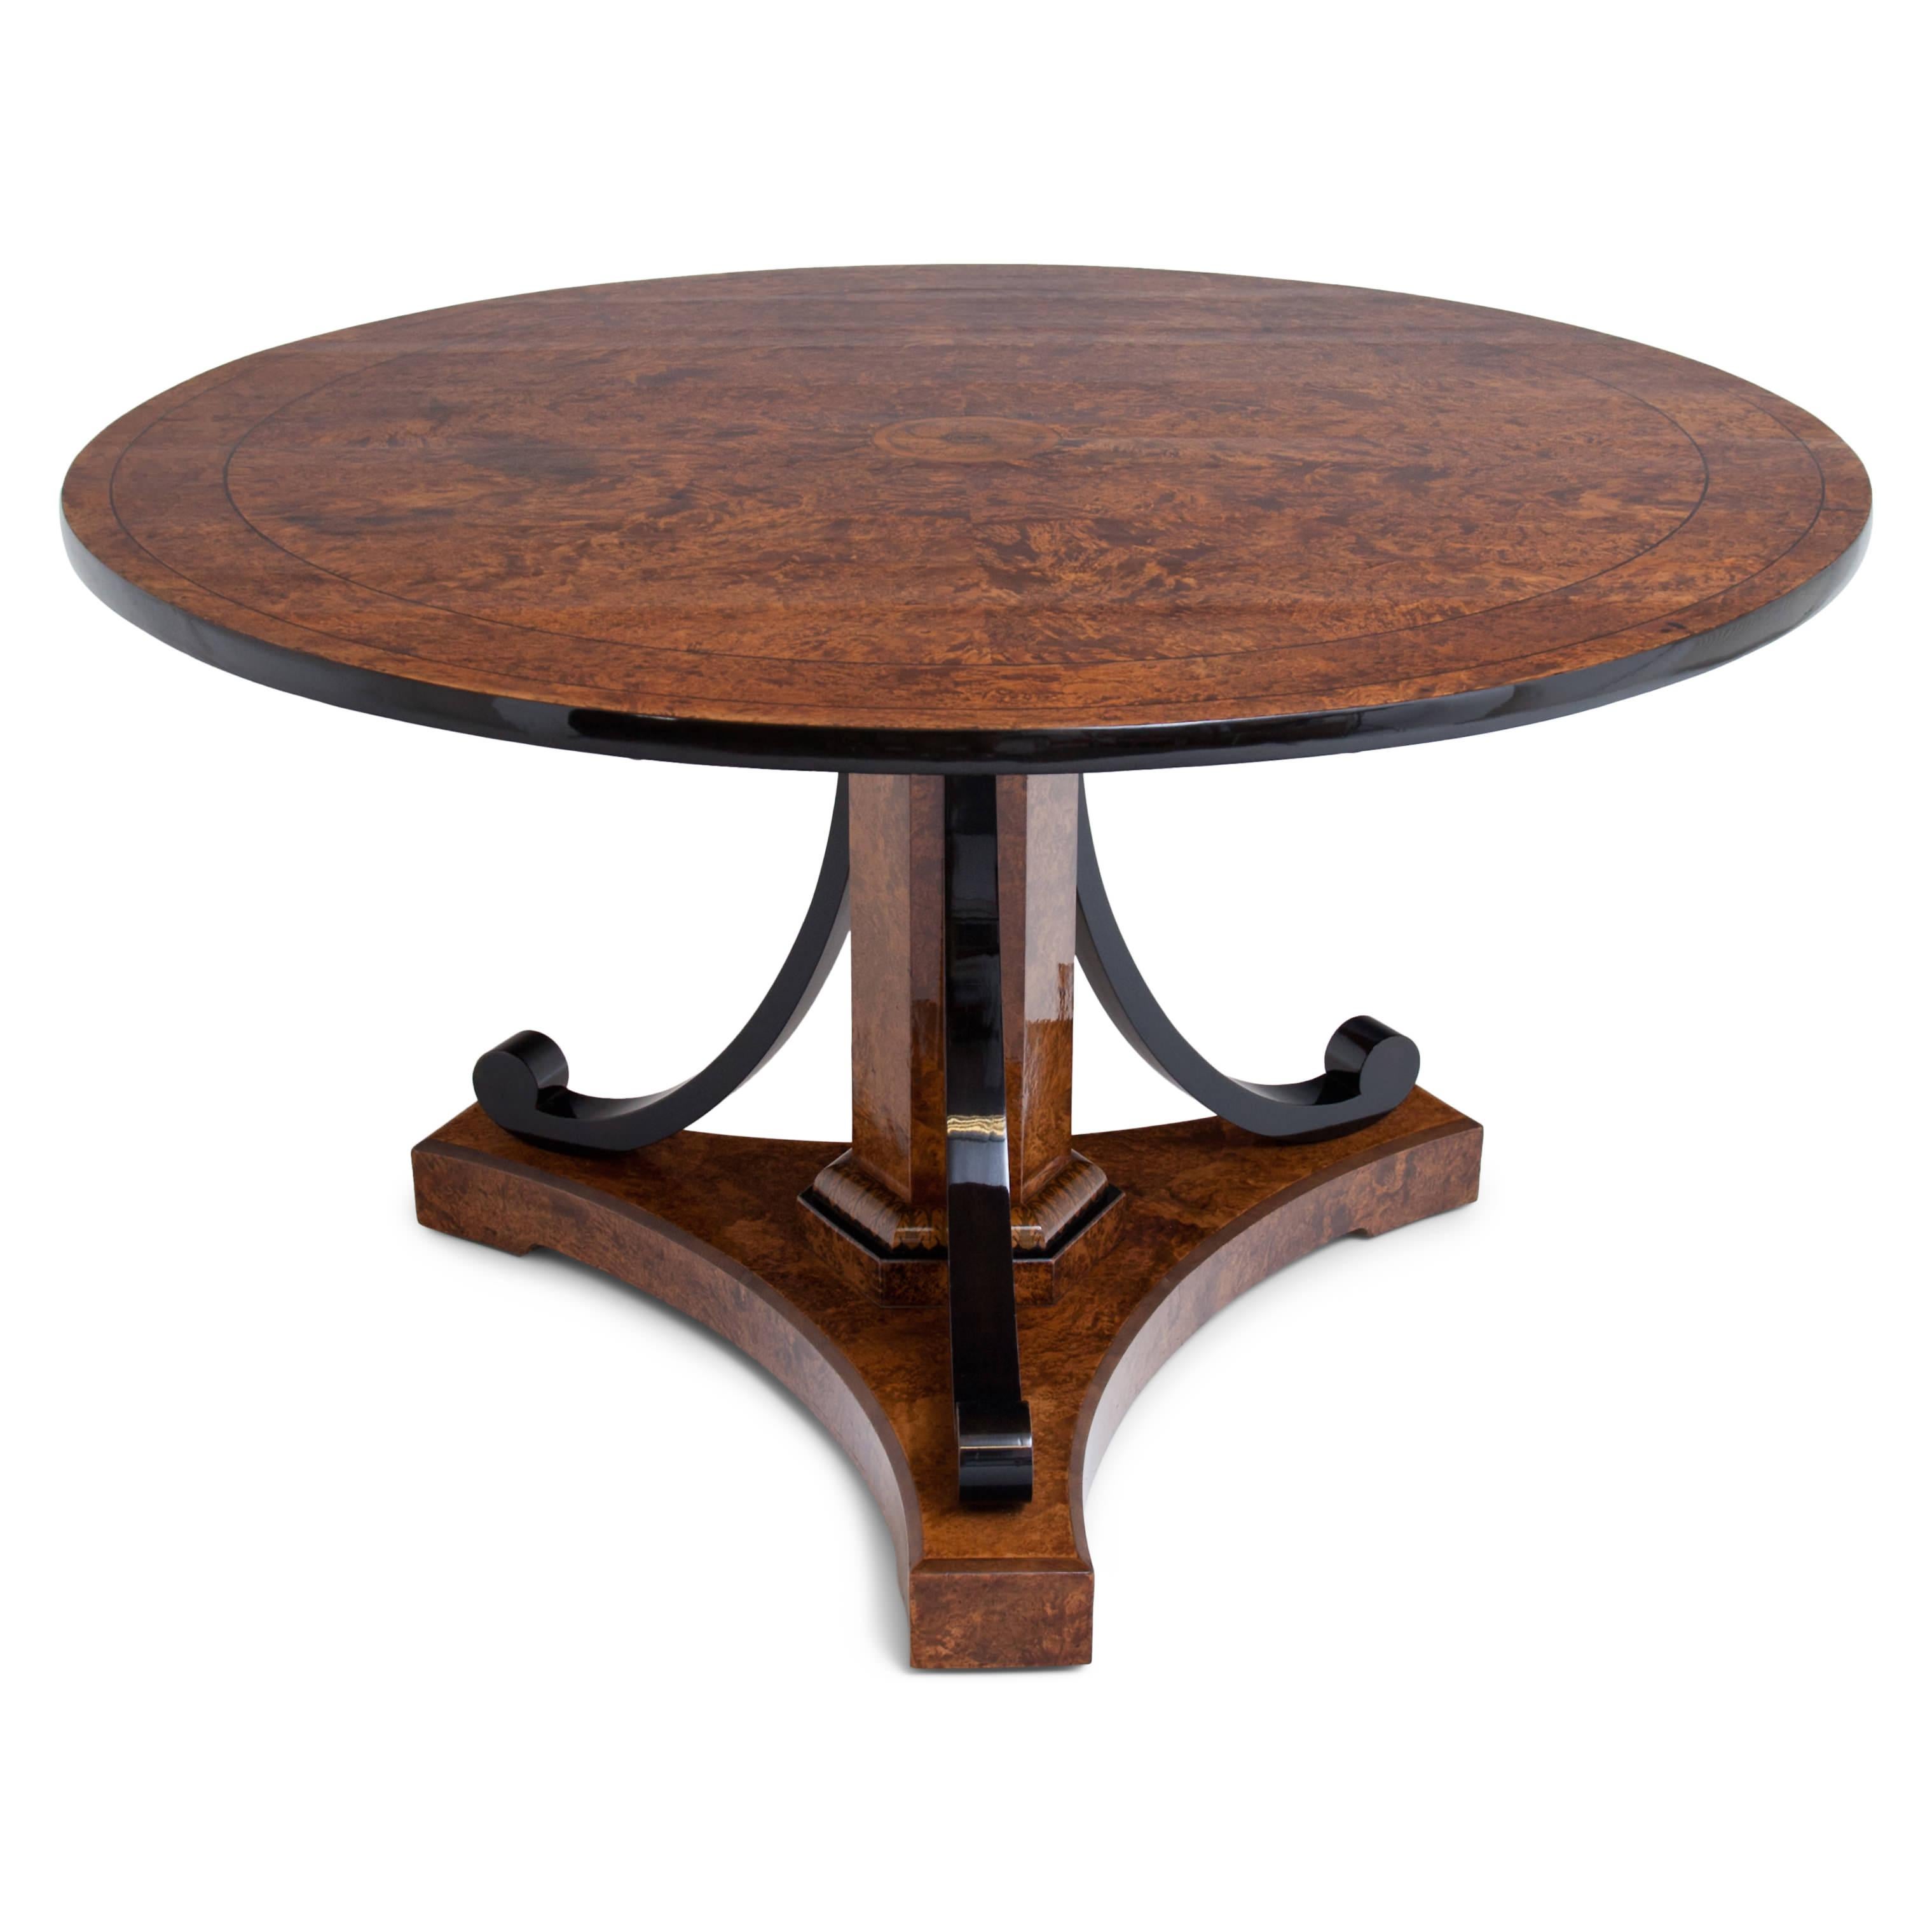 Salon table veneered in walnut root, on a trefoil stand with ebonised, rocaille-shaped legs around a hexagonal central foot with fire-shaded acanthus leaf decoration. The table top with ebonised edge and radial thread inlays shows a central flower